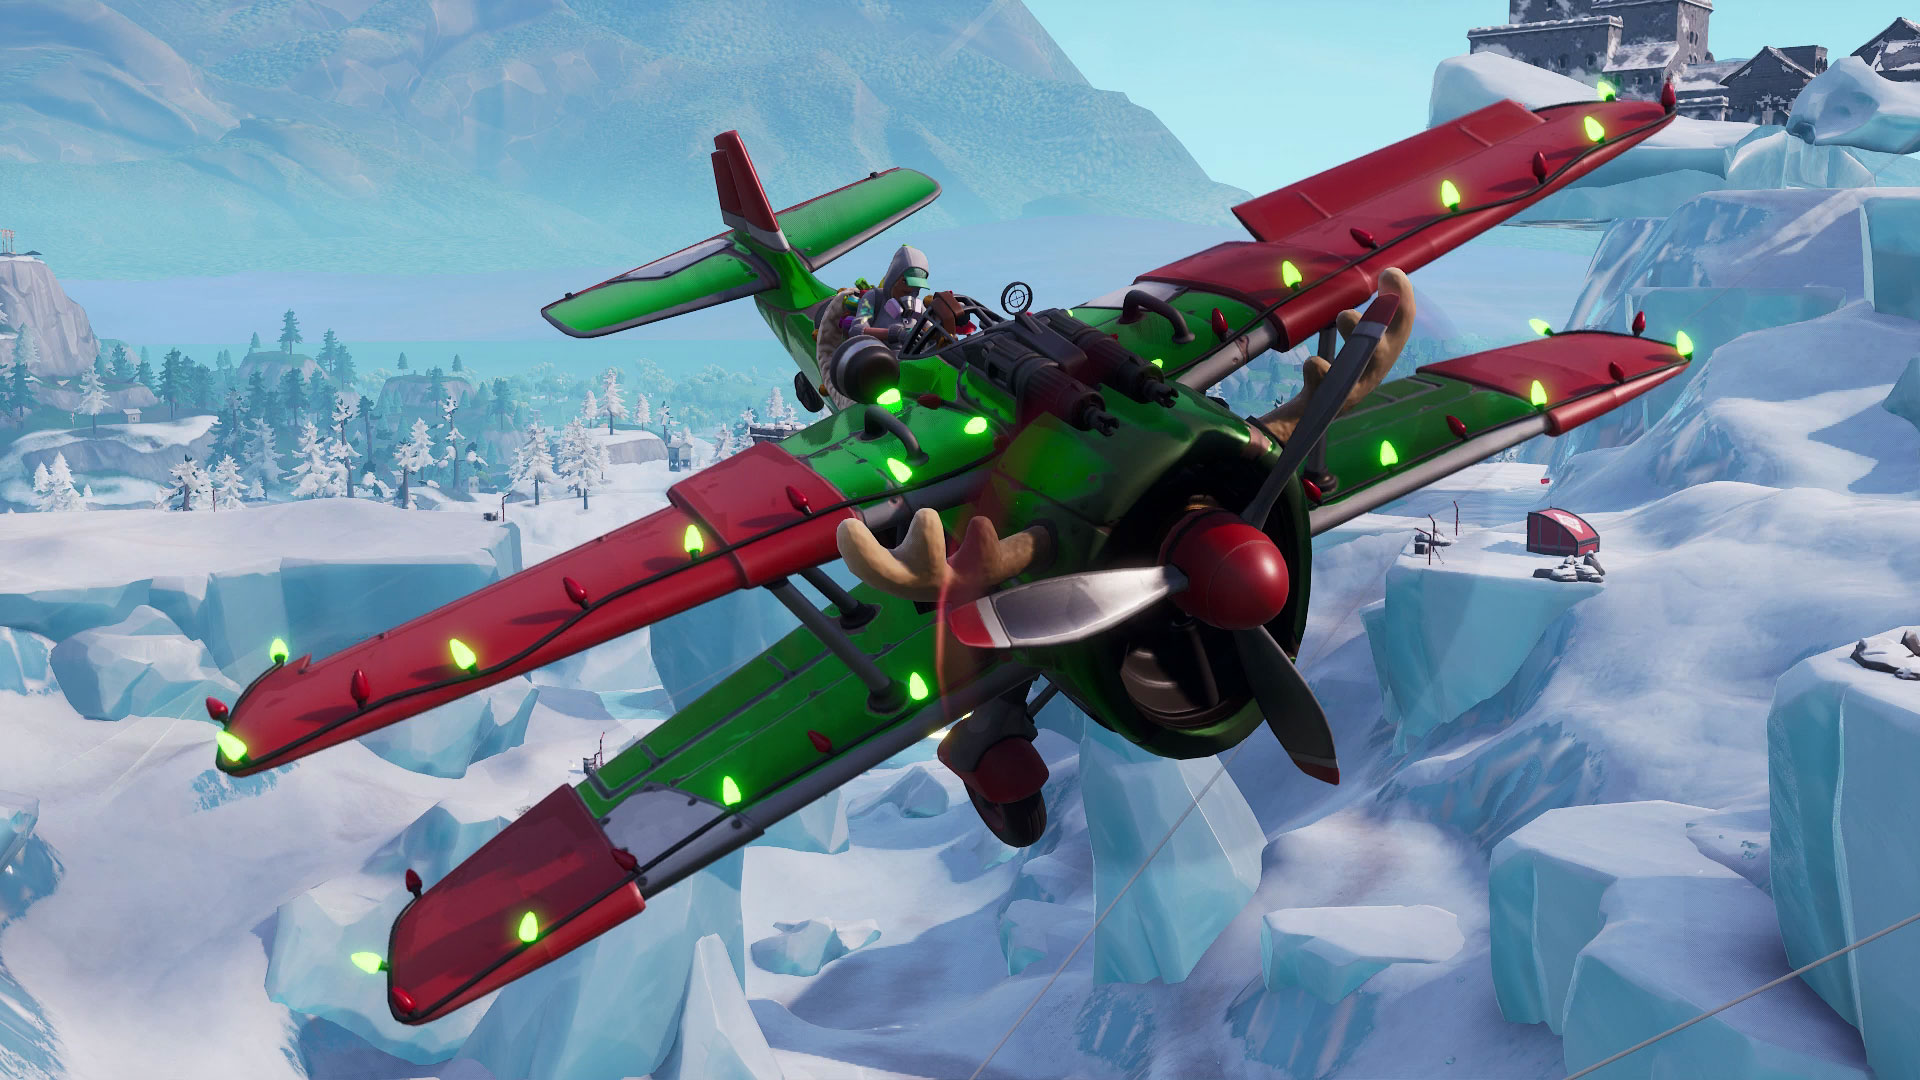 Fly A Plane Weekly Fortnite Where To Find A Fortnite Plane And Take To The Skies For Aerial Combat Gamesradar